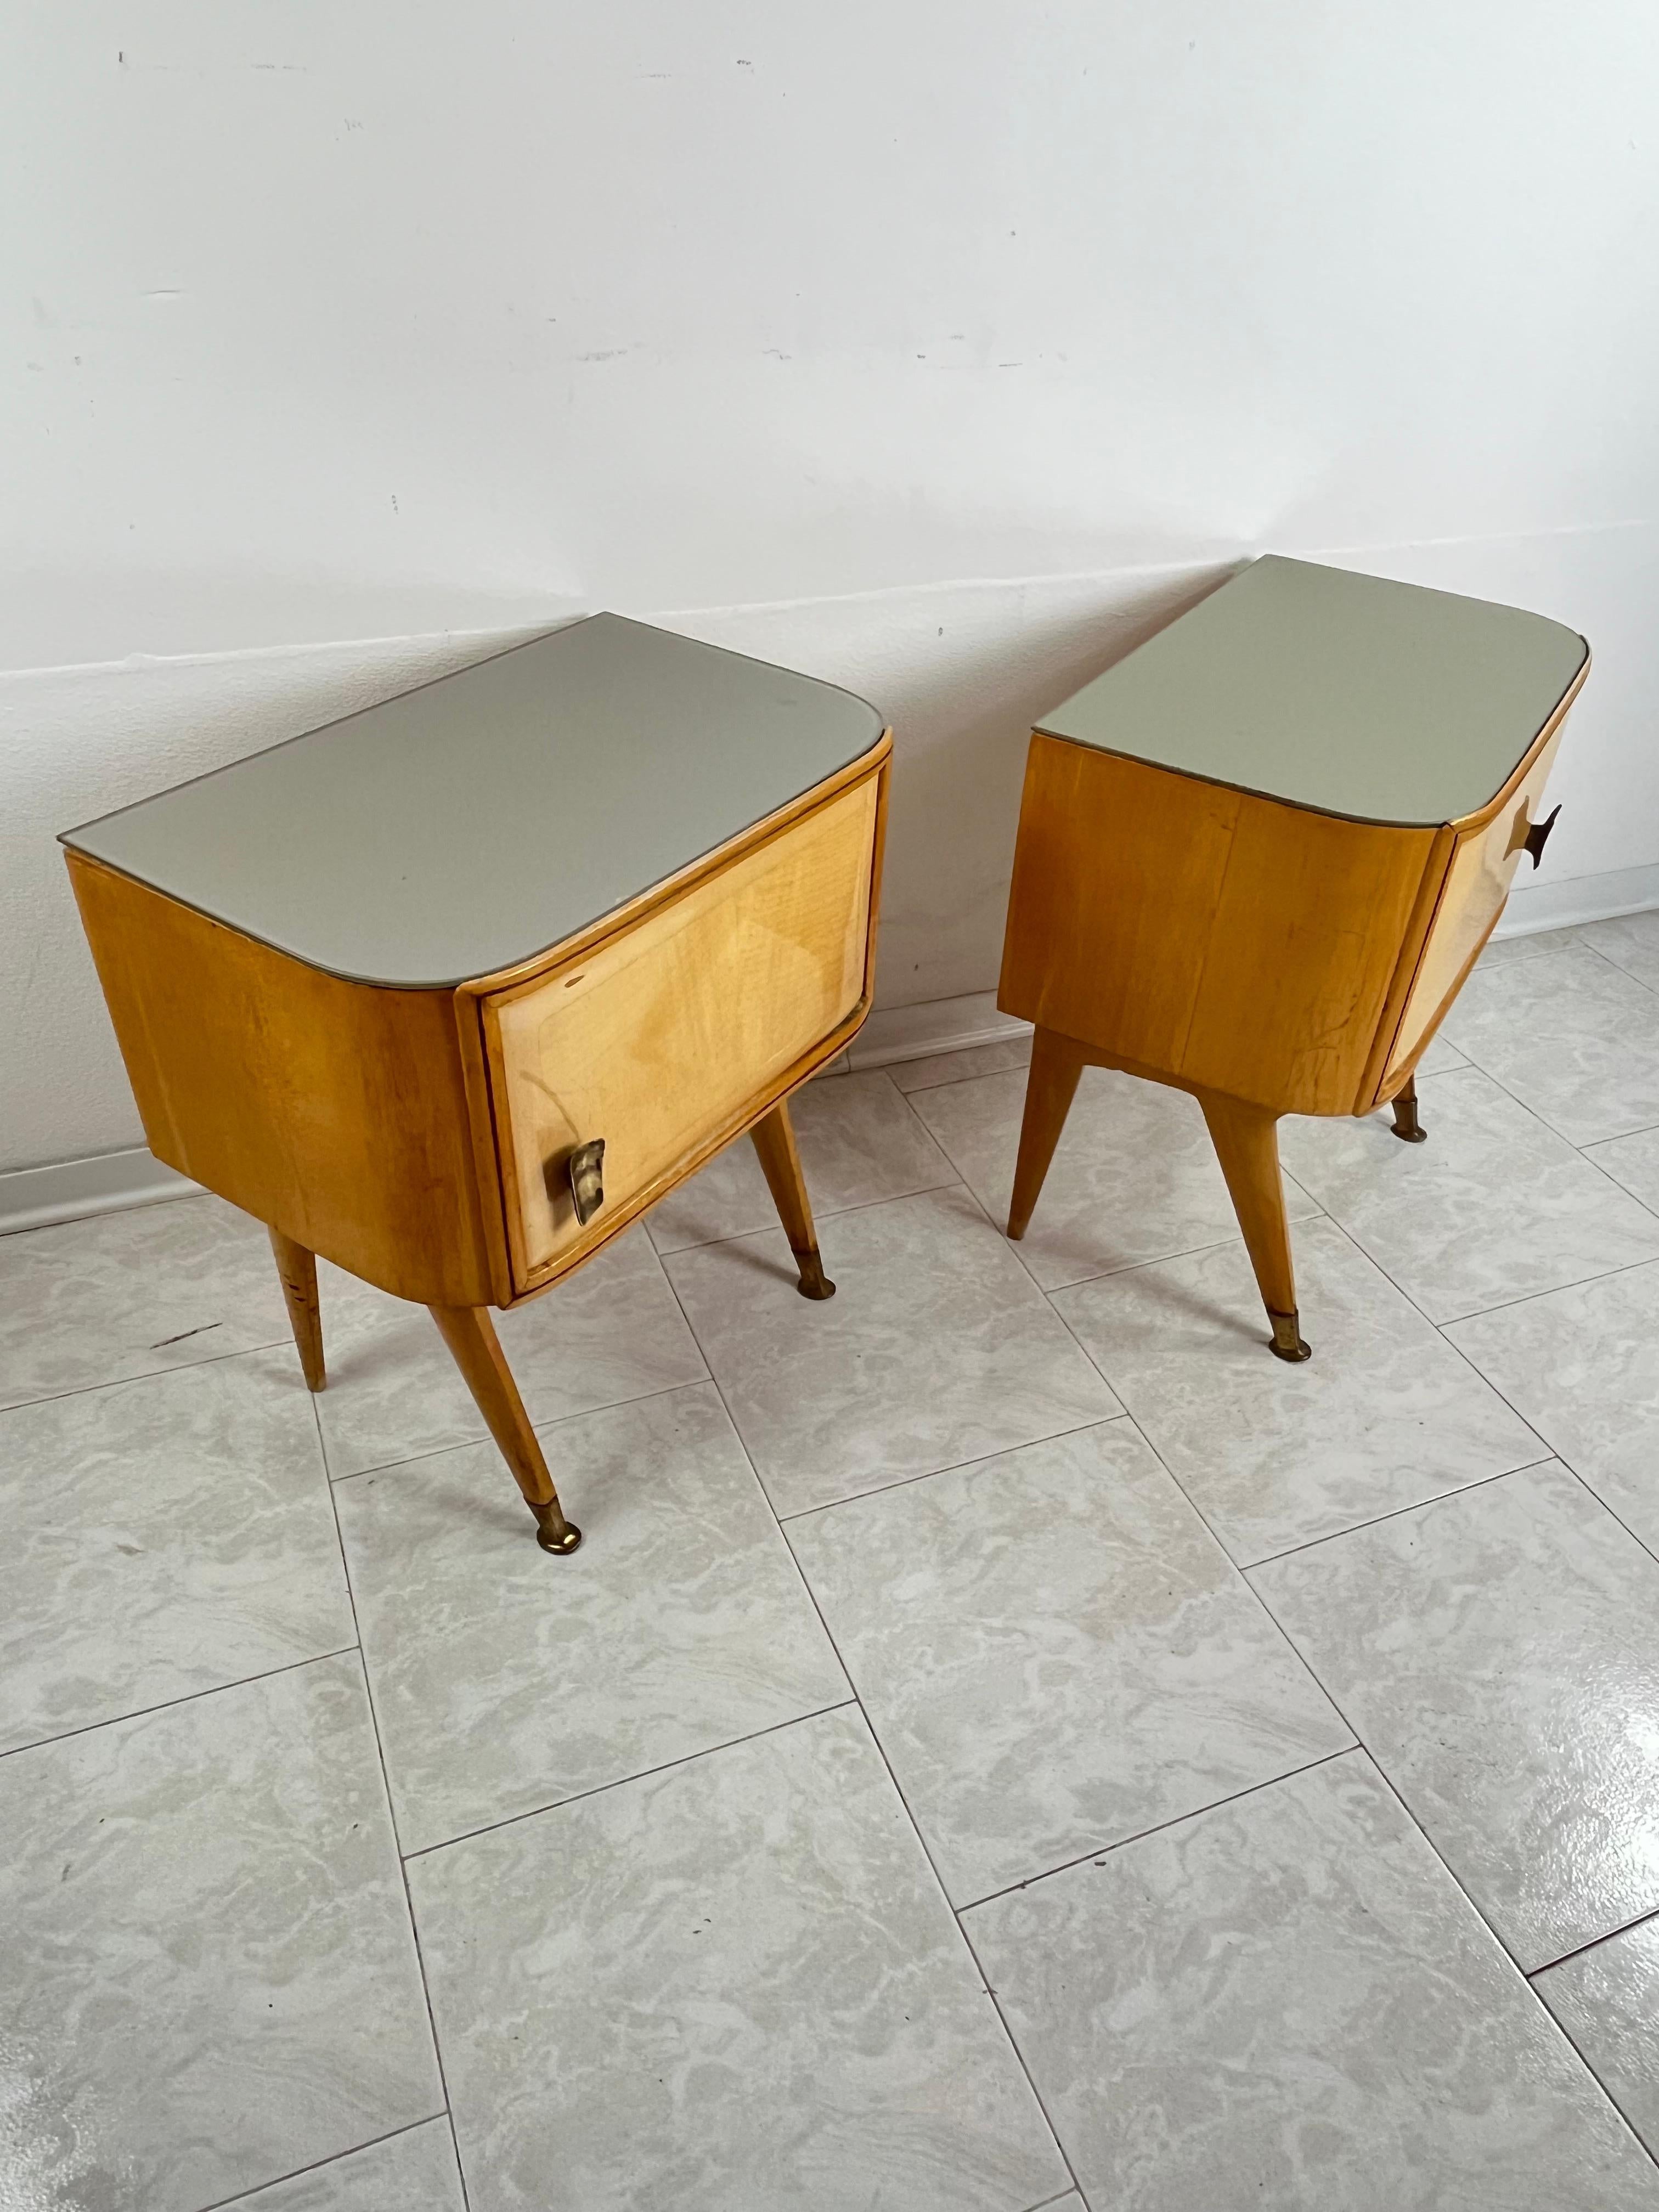 Mid-20th Century Set Of 2 Mid-Century Bedside Tables Attributed to Vittorio Dassi 1959 For Sale